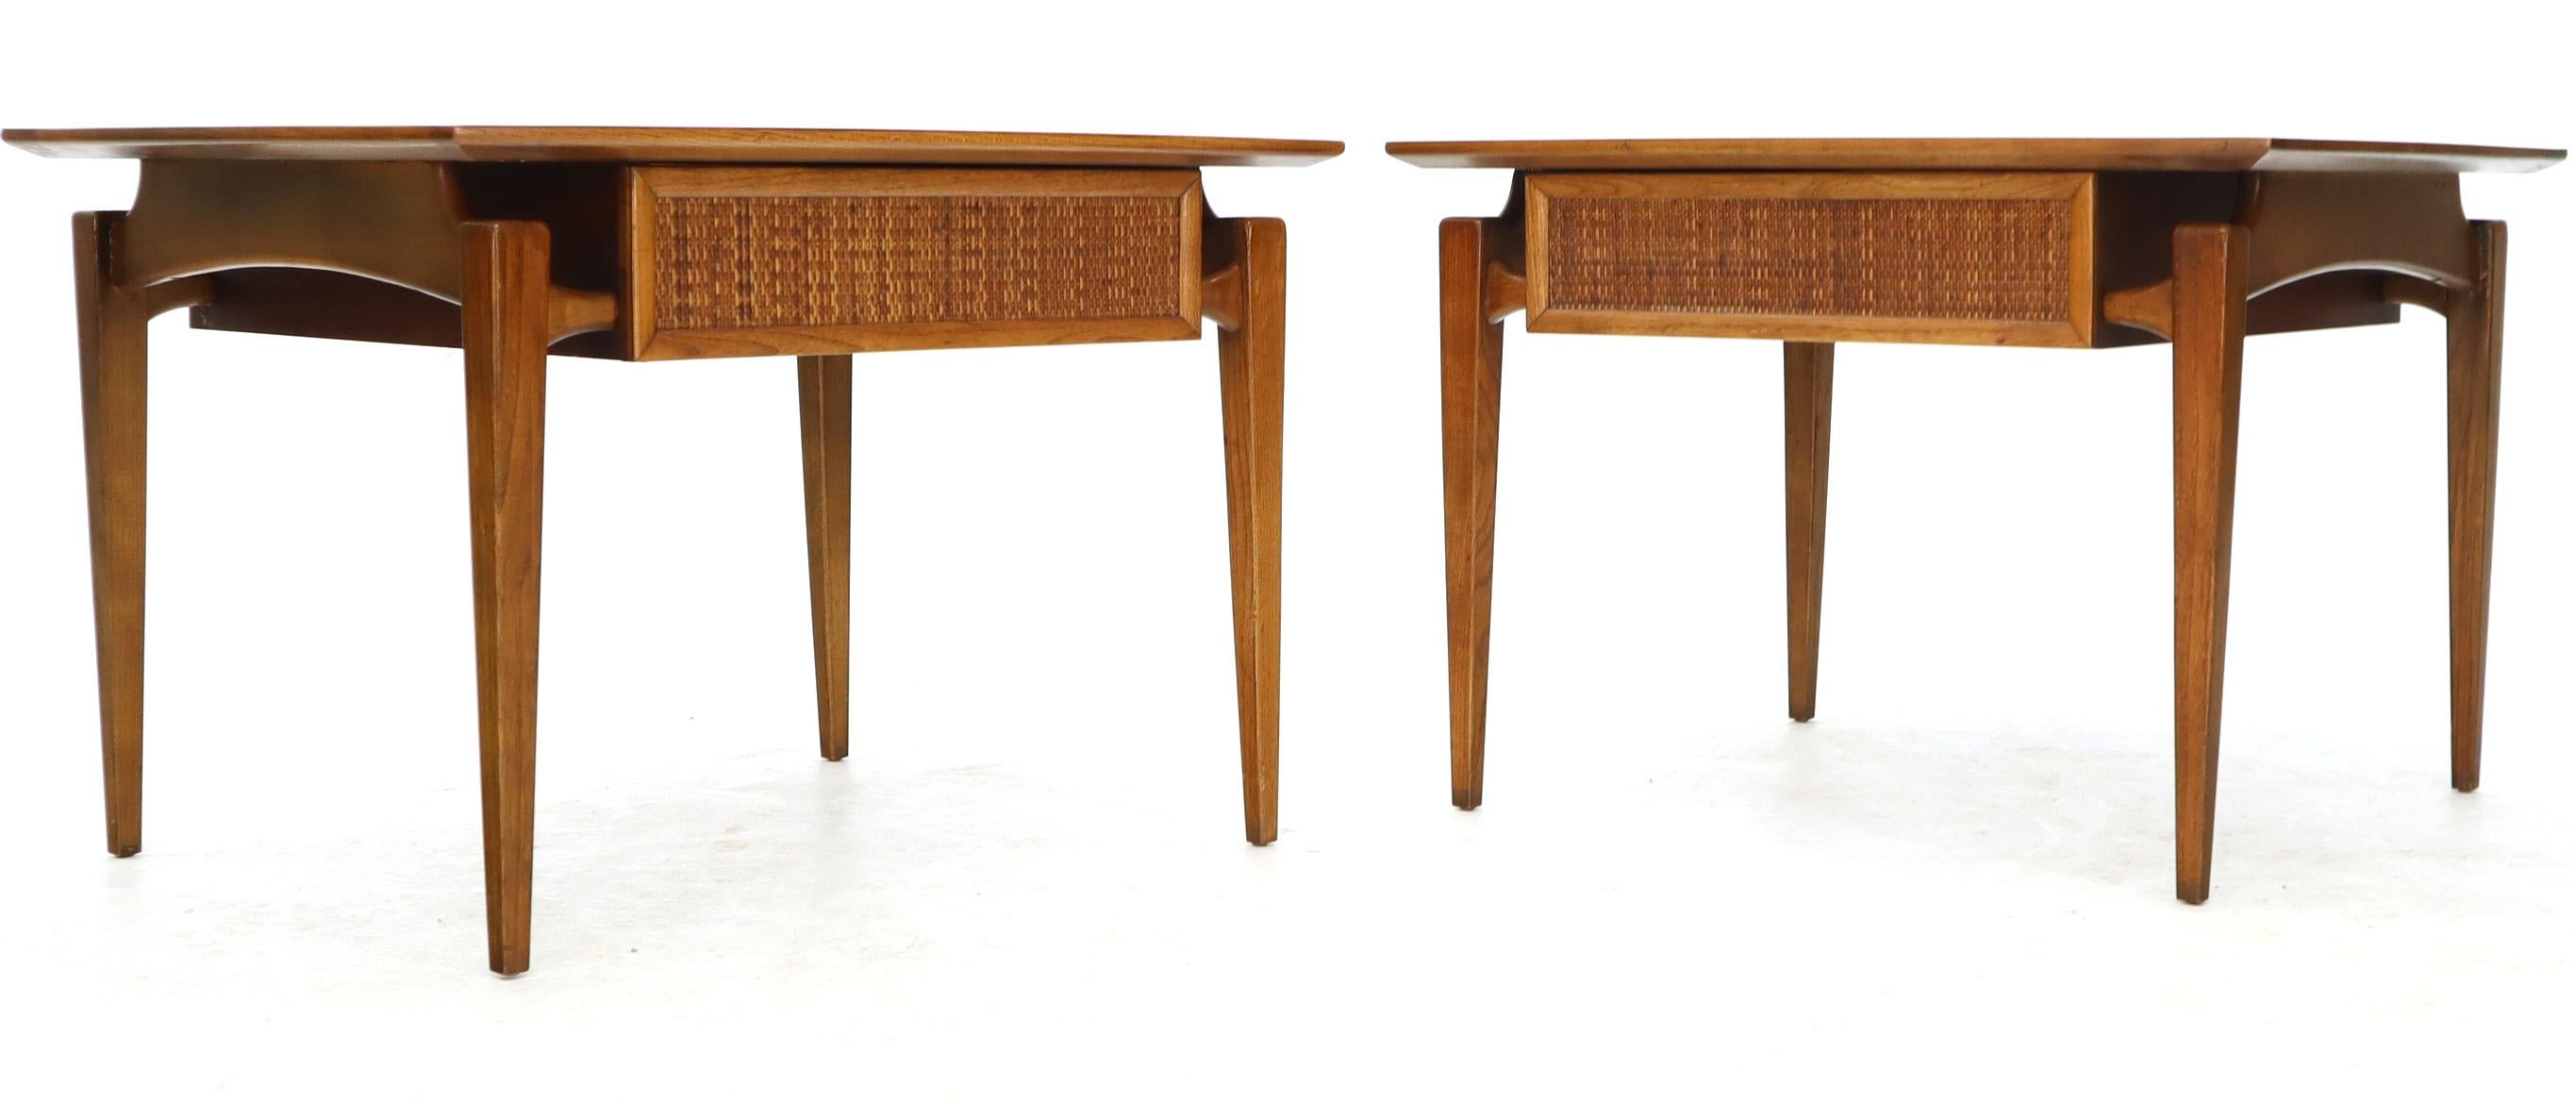 Pair of Oiled Walnut Exposed Sculptural Legs Large Square Side End Tables 5